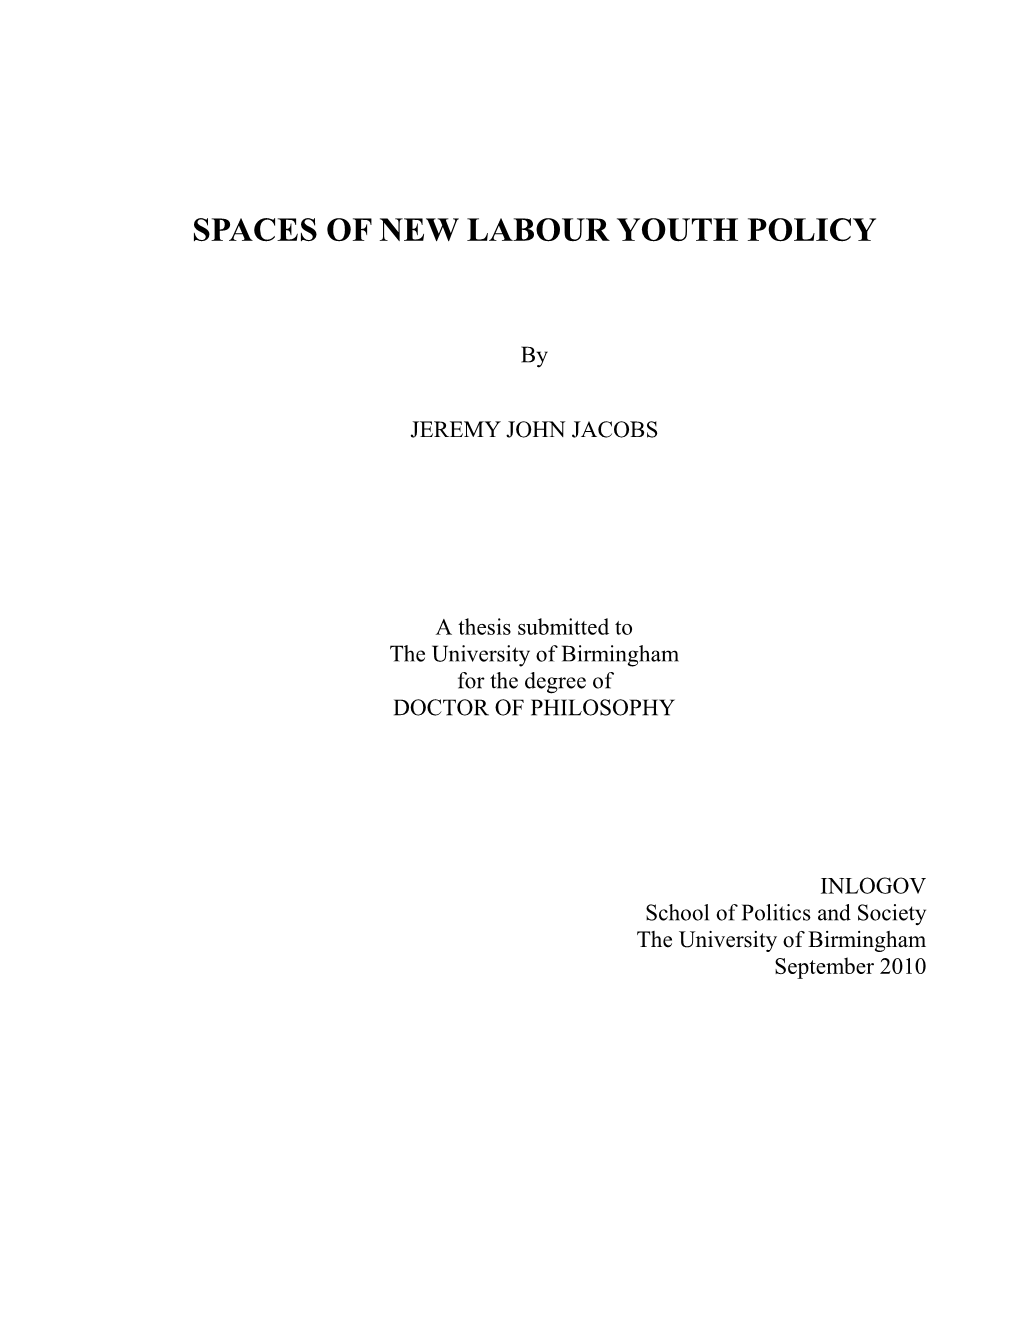 Spaces of New Labour Youth Policy